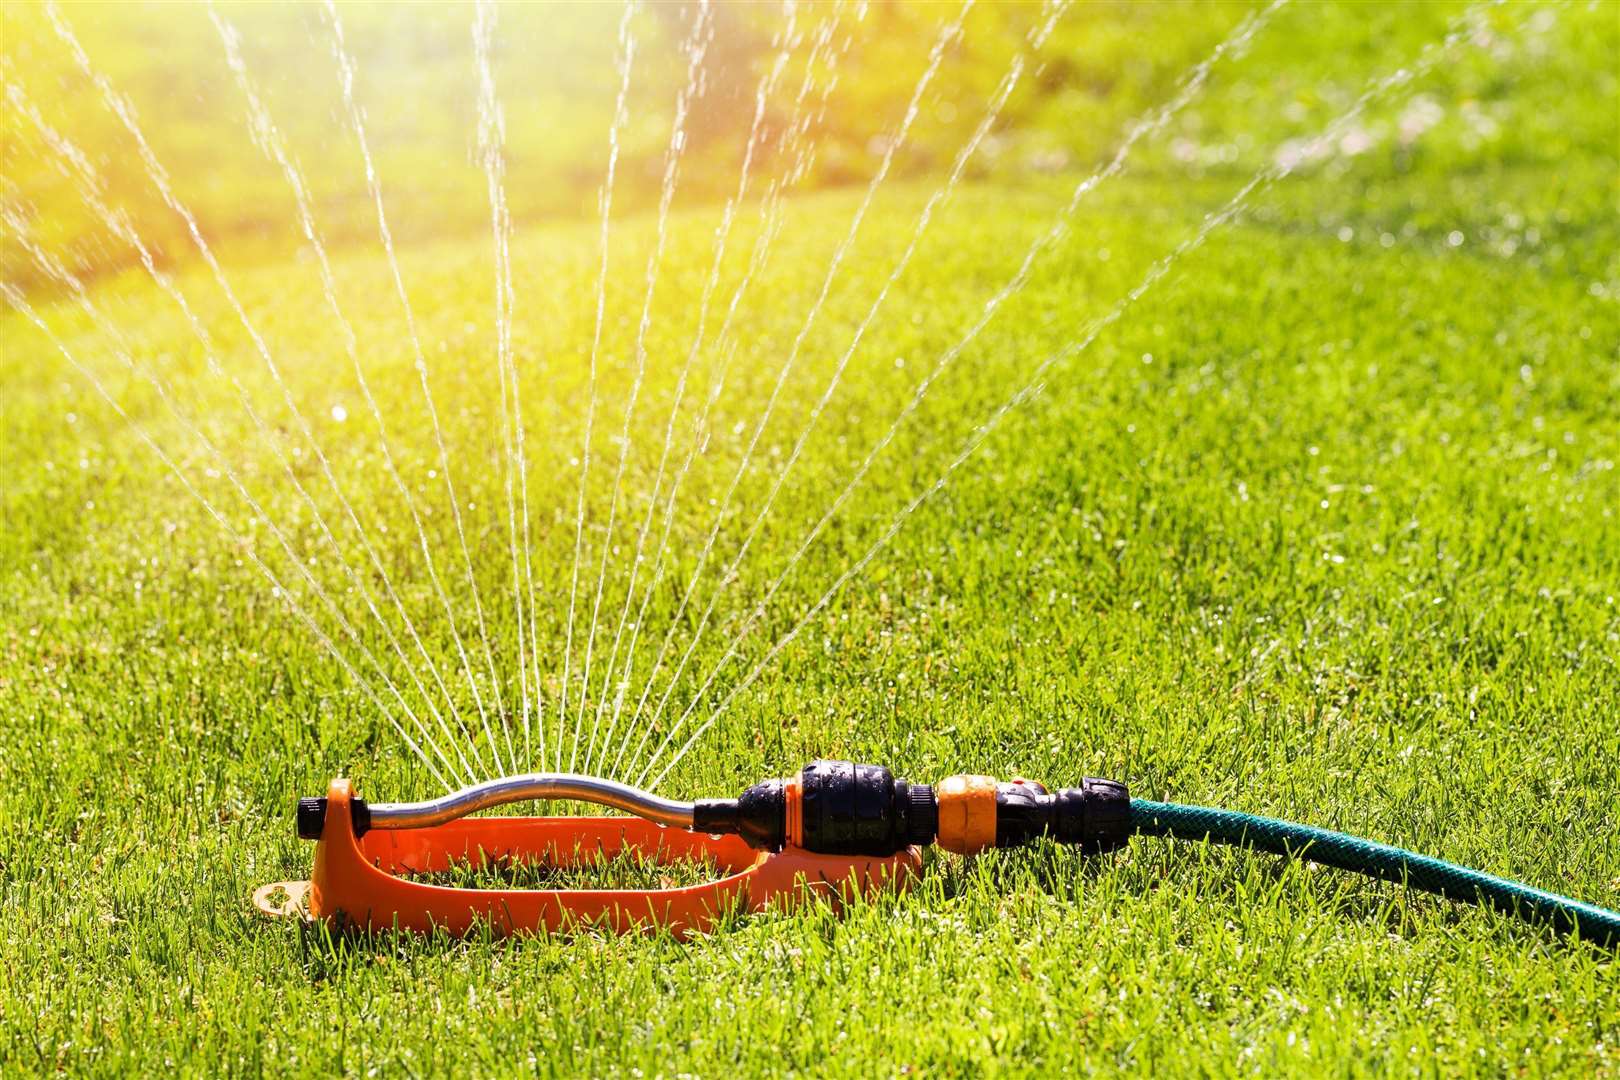 Water users are being asked to not use hoses or sprinklers. Stock image.